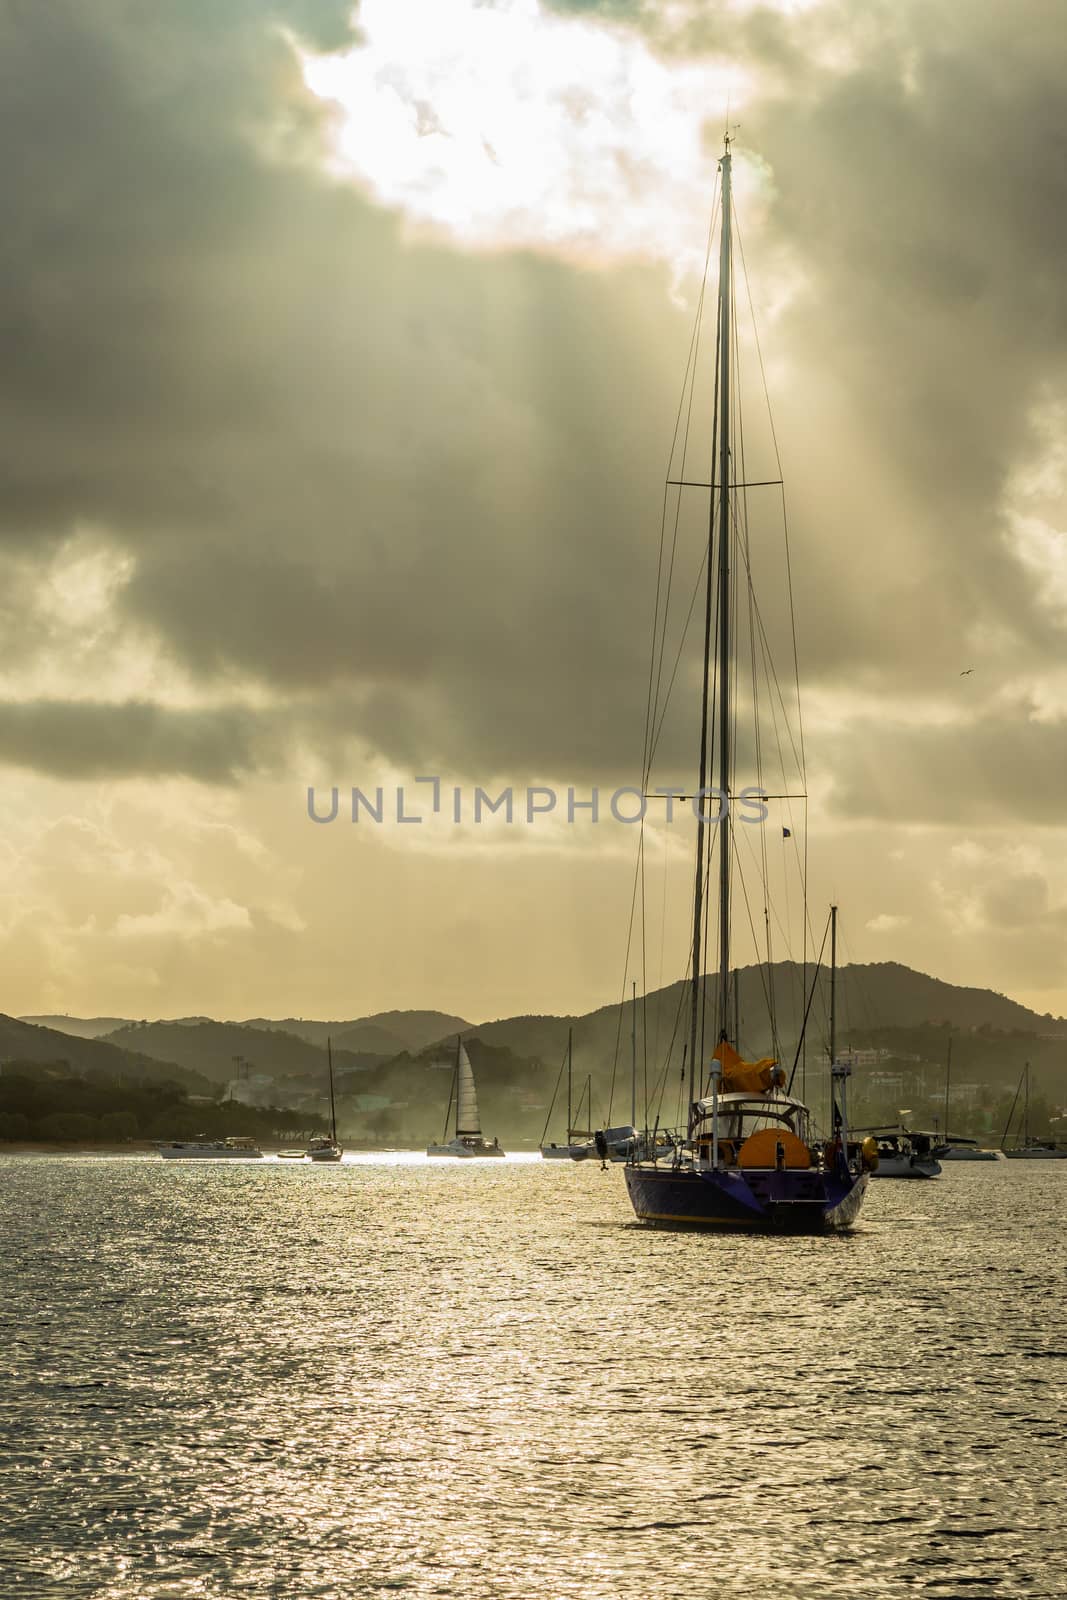 Sunset view of Rodney bay with yachts anchored in the lagoon, Sa by ambeon